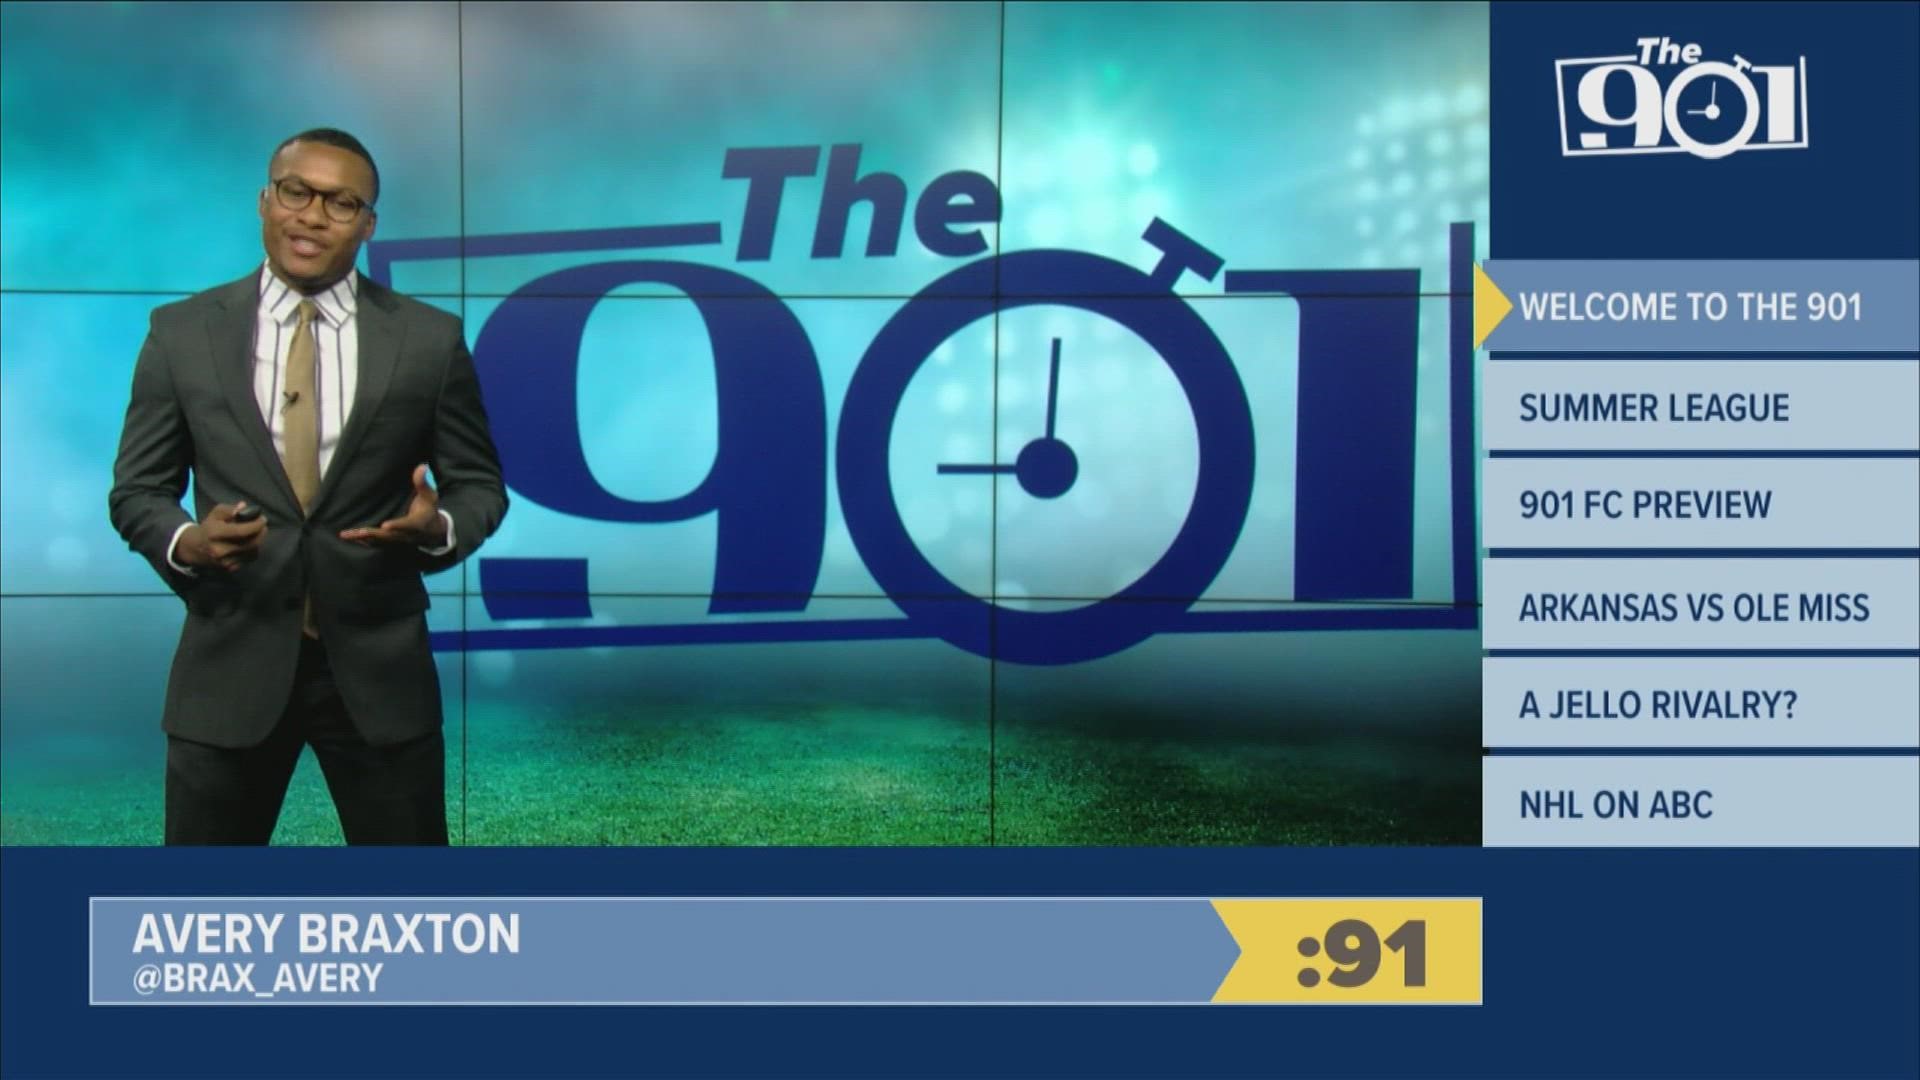 Avery Braxton gets you up to speed on everything Memphis sports in Monday's episode of The 901.